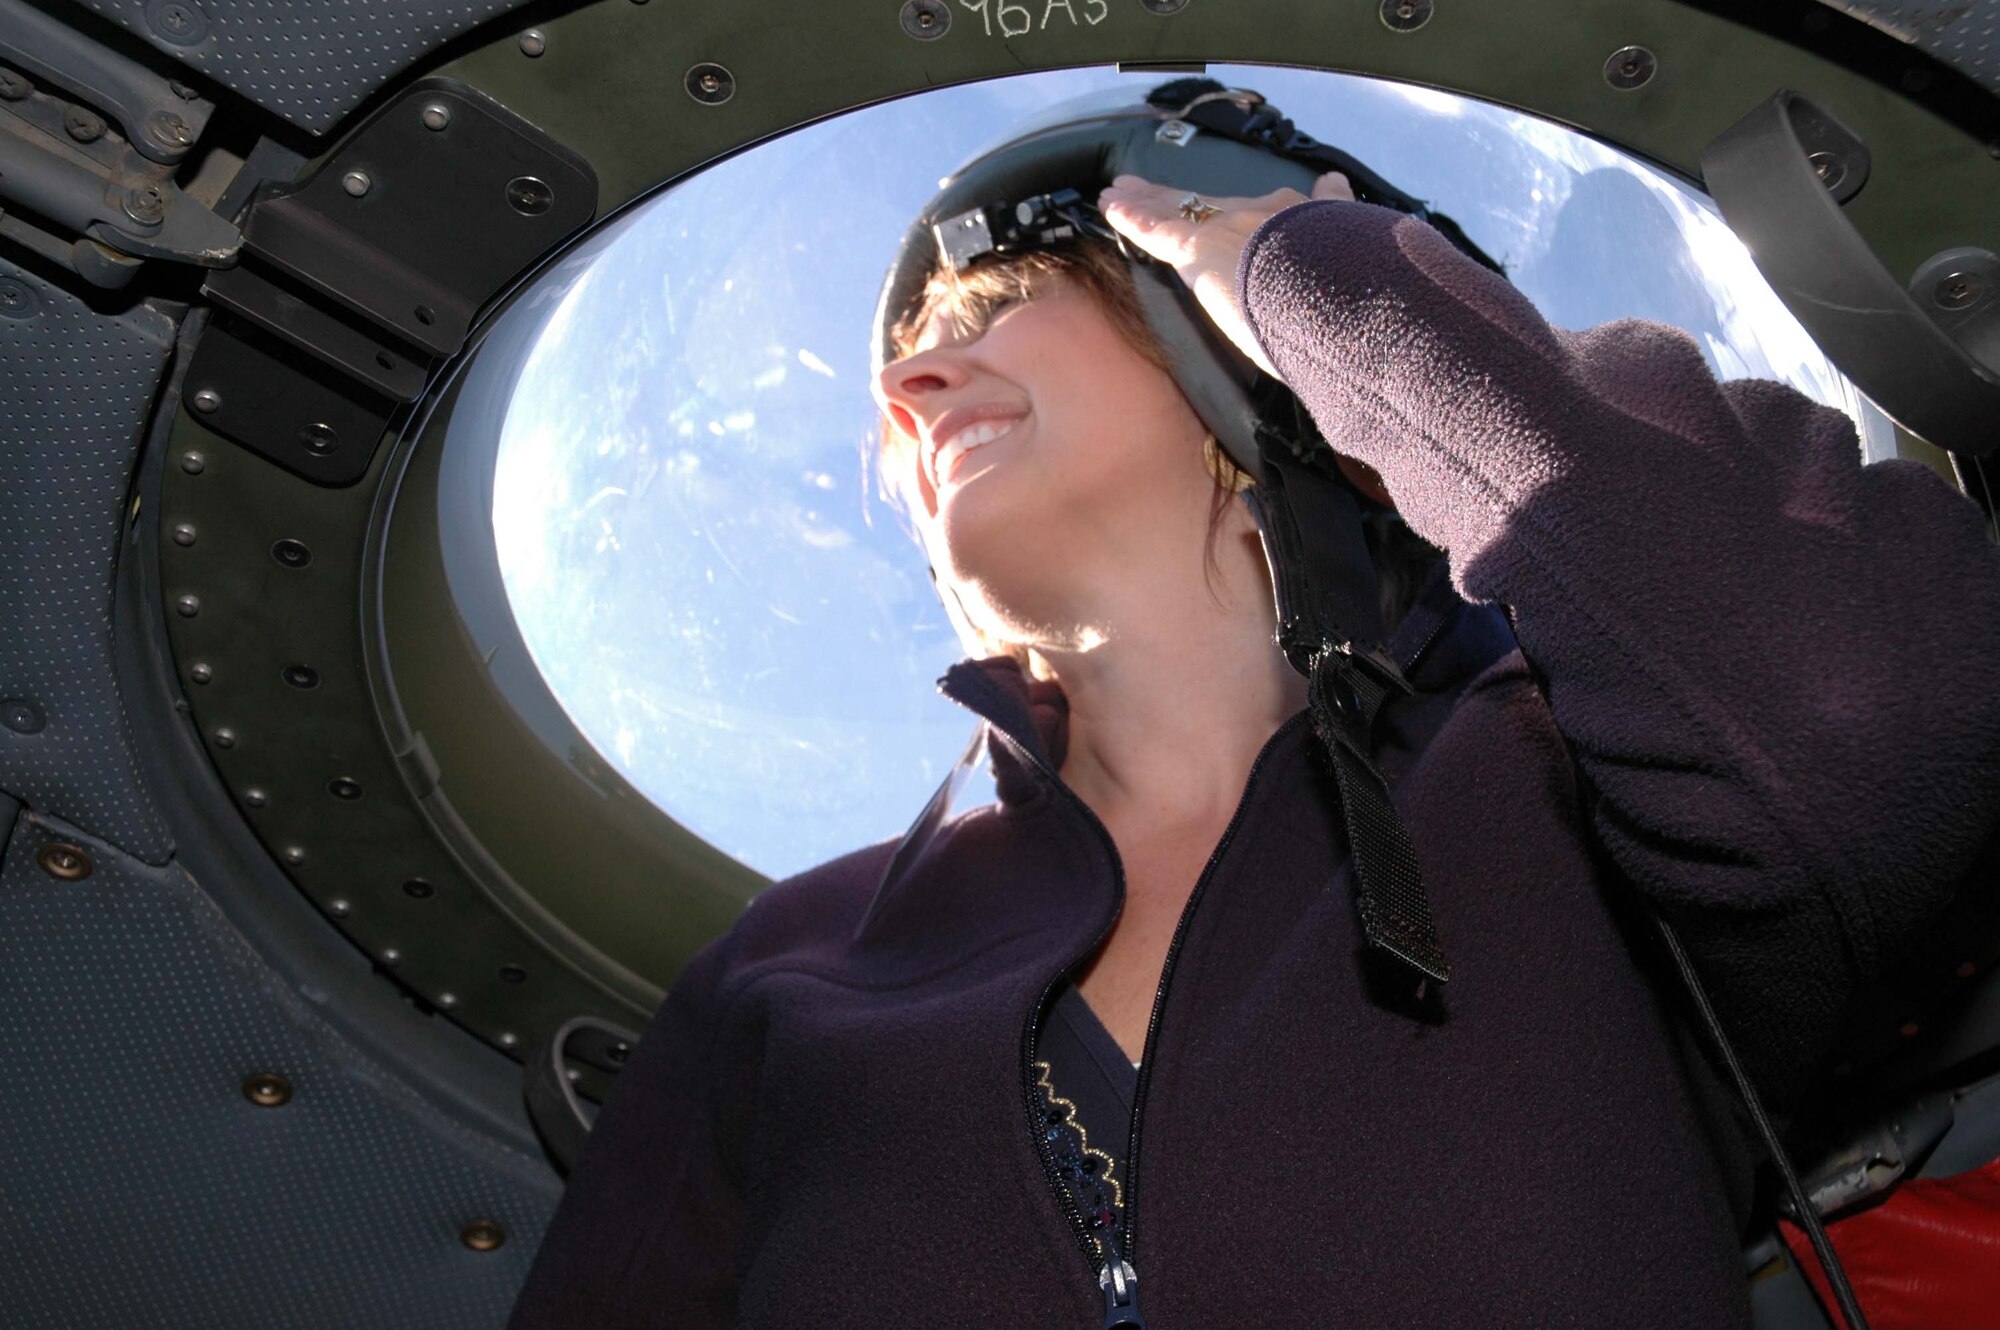 Holly Andreasen gets a 360 degree view of the world from the cockpit bubble in the C-130 as part of the 934th Airlift Wing Employers Day. Employers of reservists had the chance to get a close up look at the 934th and learn about the job their employees do in the Air Force Reserve. (Air Force Photo/Master Sgt. Kerry Bartlett)